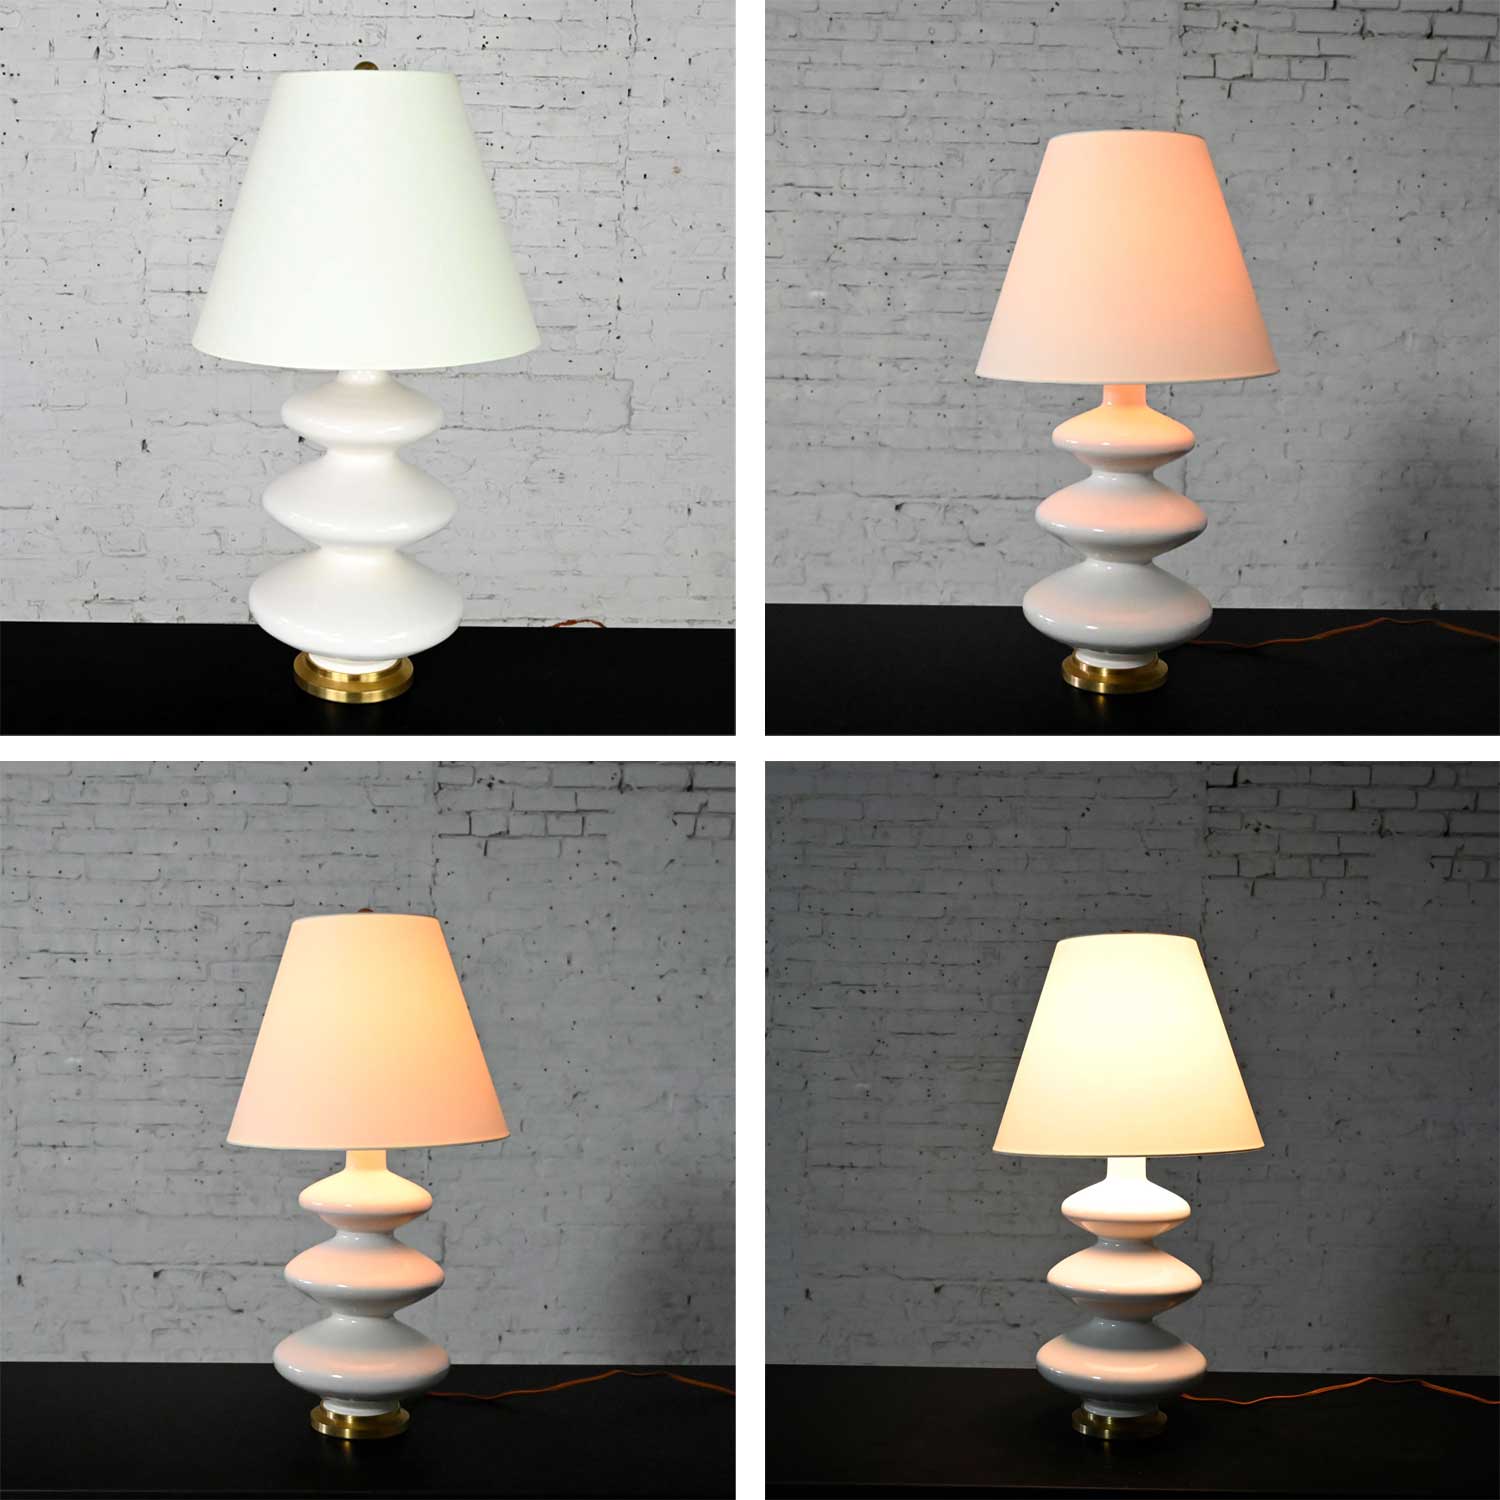 Smith Ivory Table Lamp Brass Details by Christopher Spitzmiller for Visual Comfort